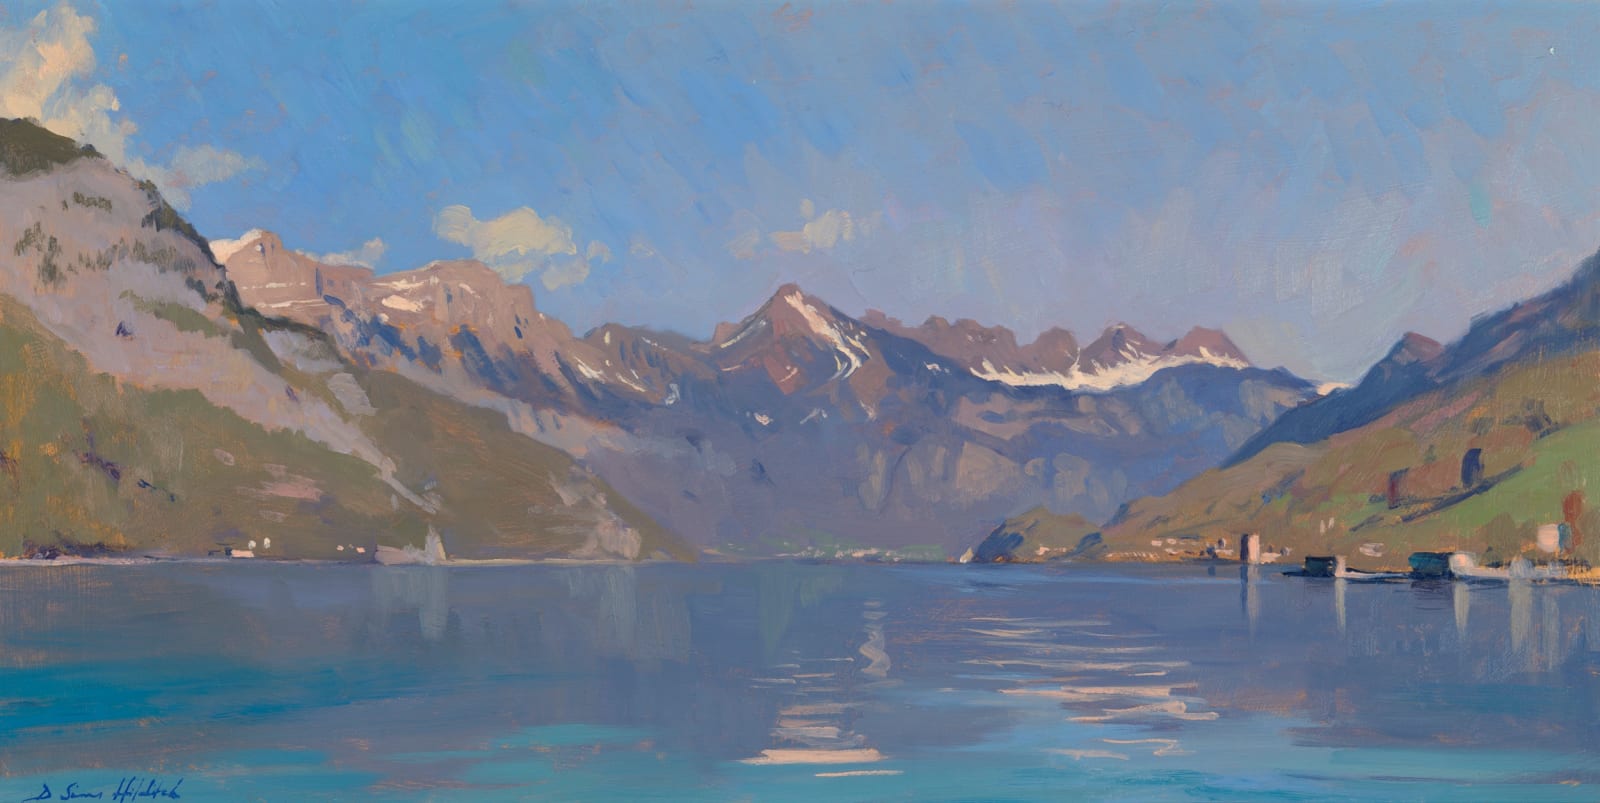 Daisy Sims Hilditch, Turquoise waters, Spring, Walensee, 2022